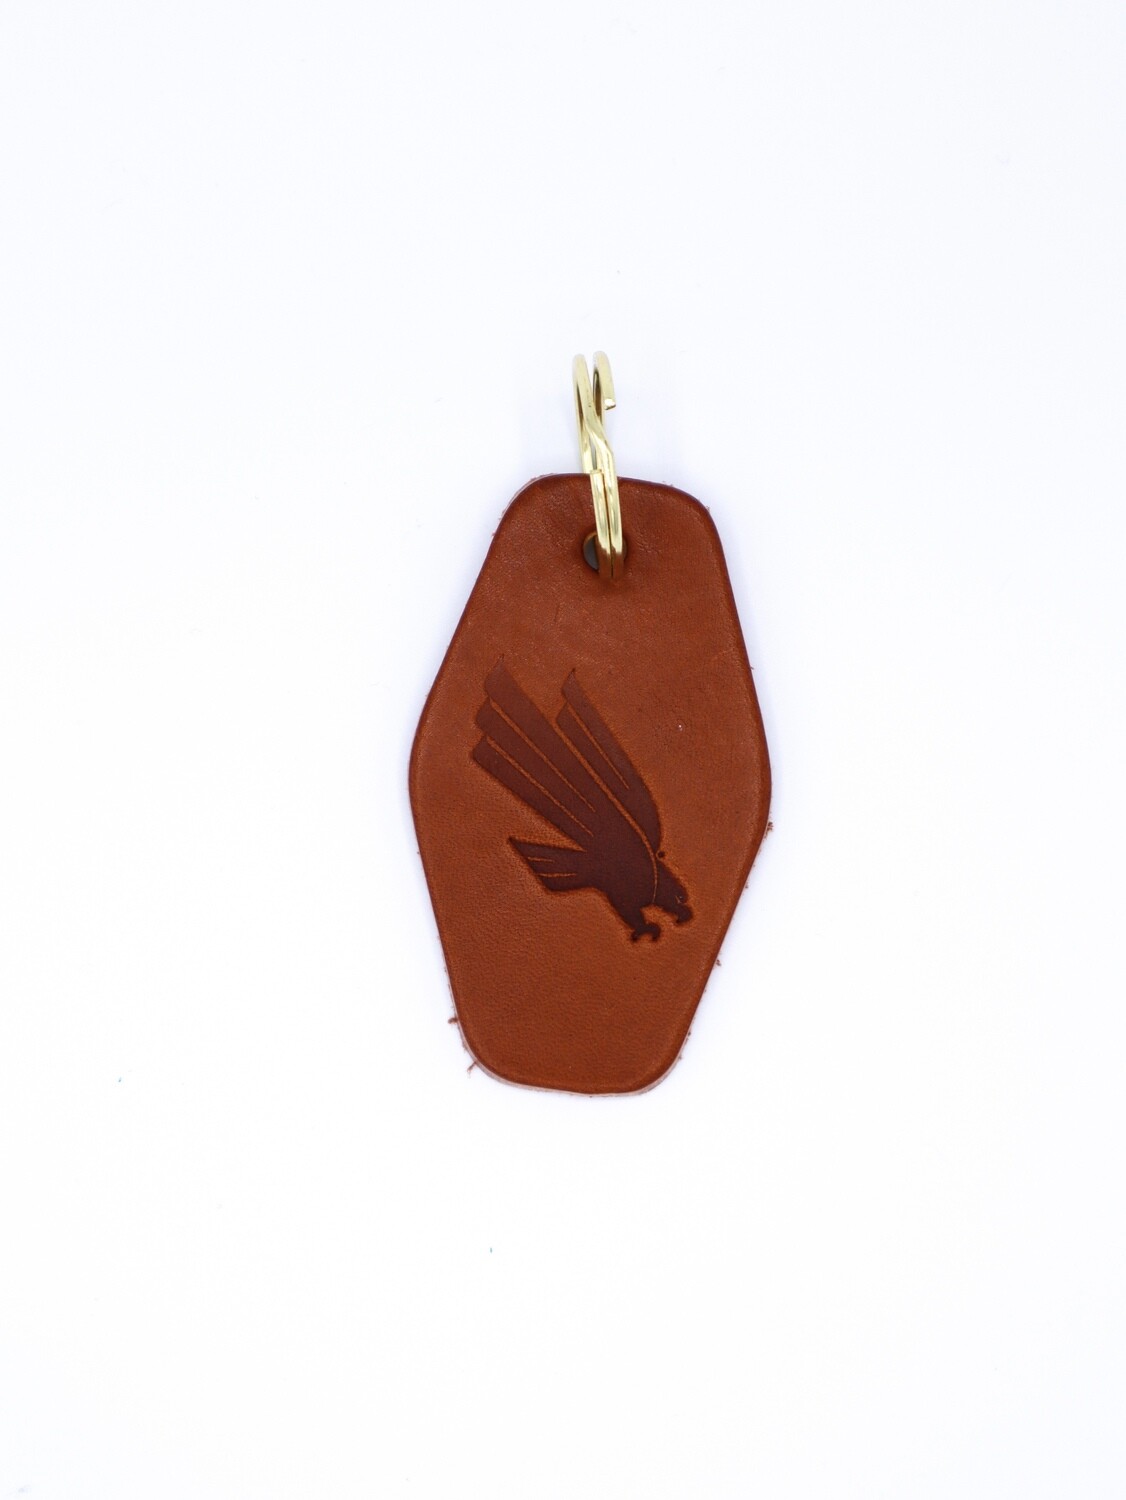 Diving Eagle Keychain